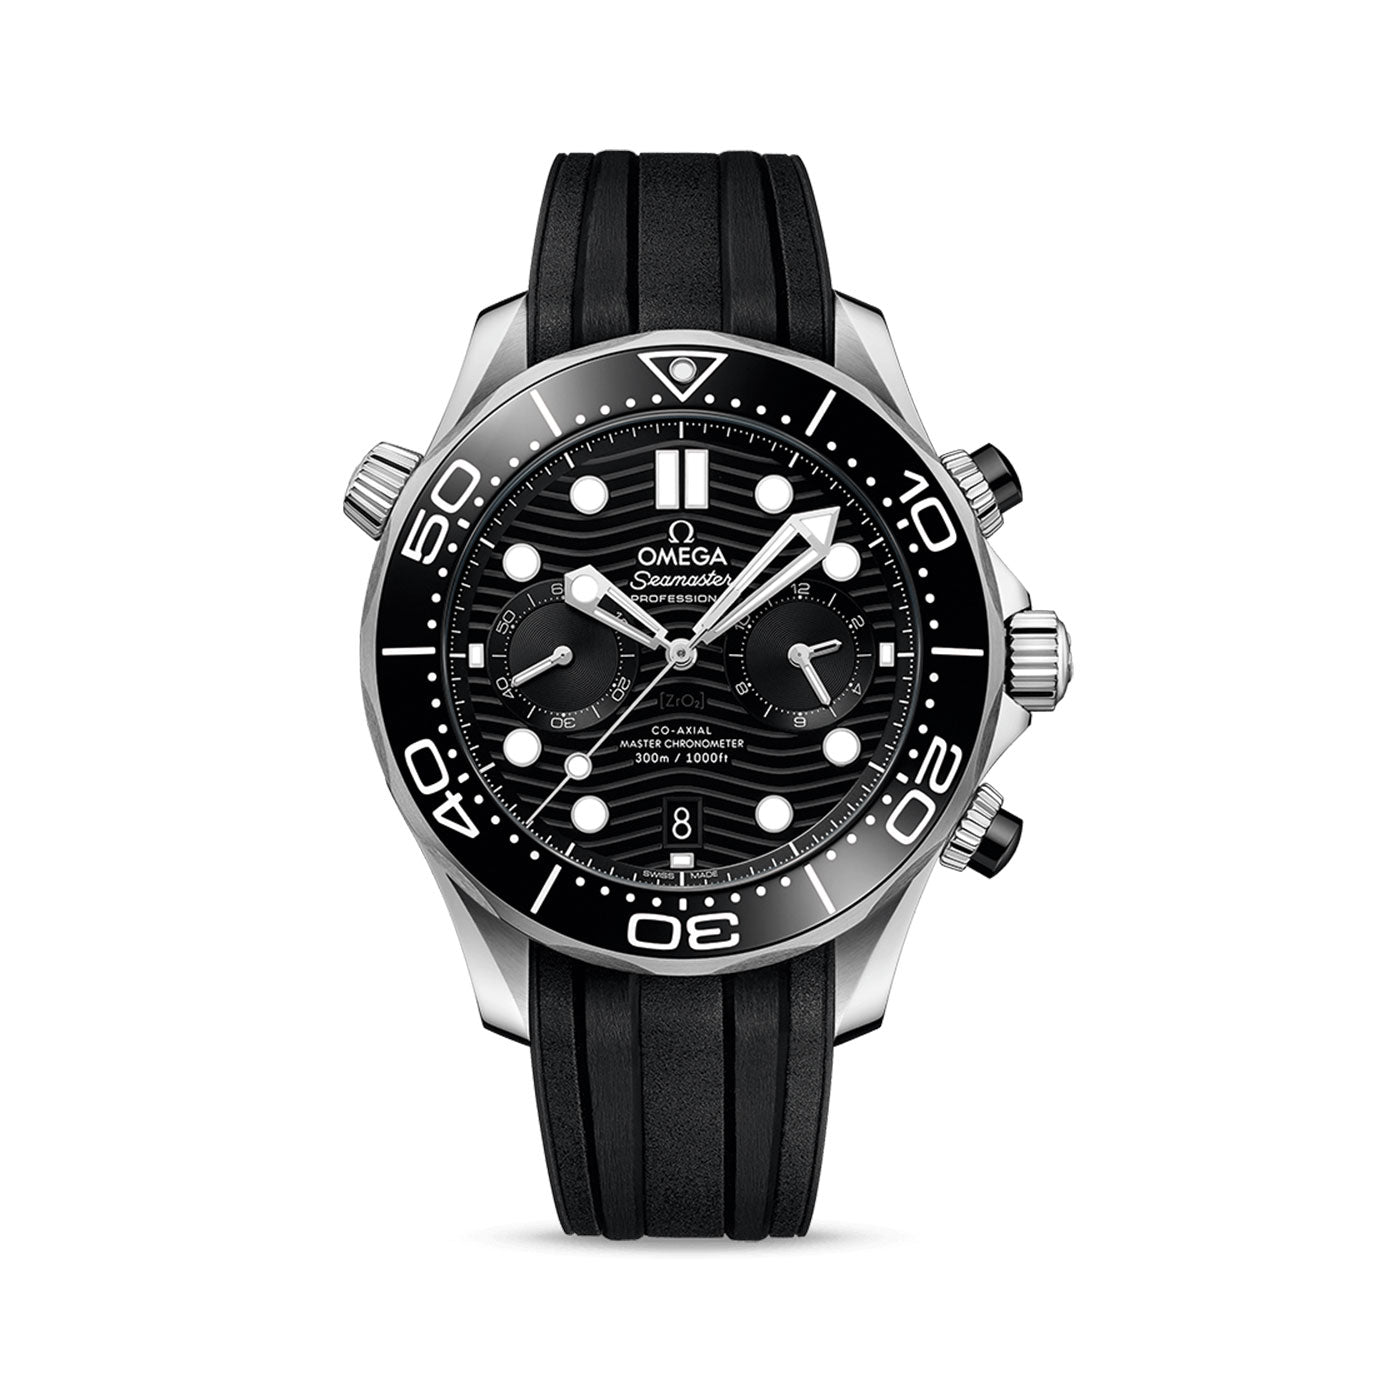 Omega Seamaster DIVER 300M CO‑AXIAL MASTER CHRONOMETER CHRONOGRAPH Ref# 210.32.44.51.01.001